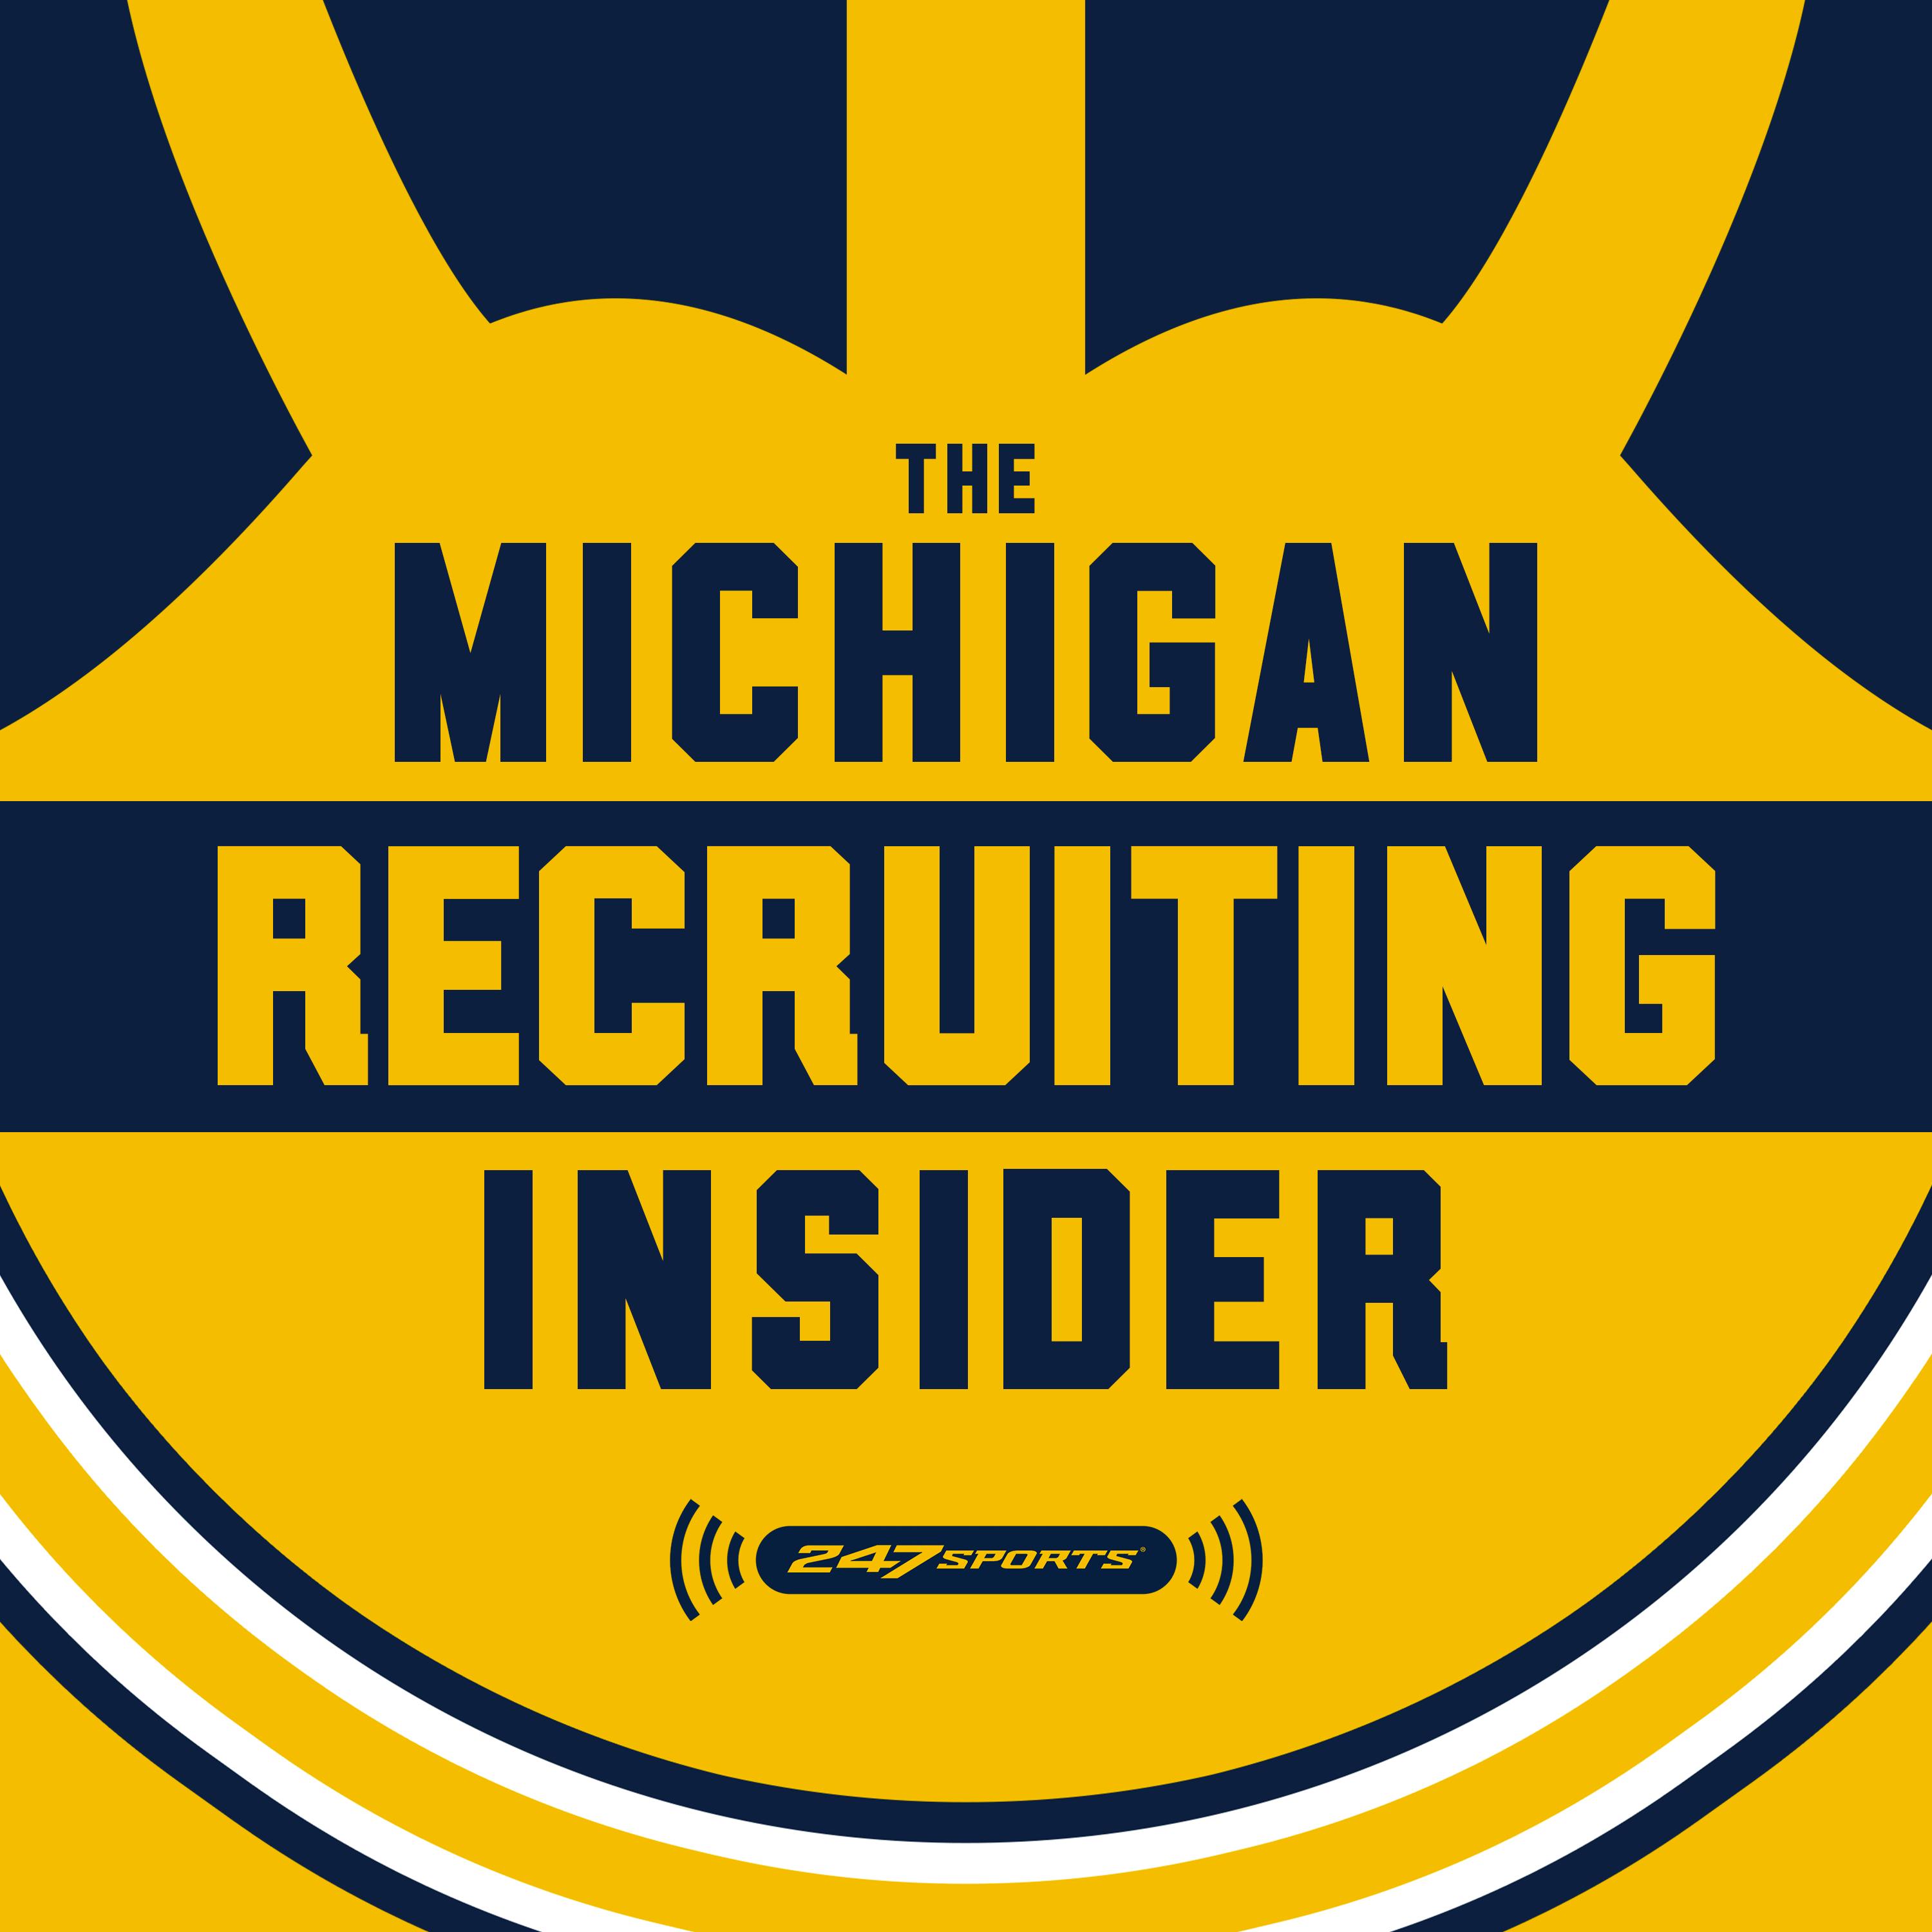 Does Carter Smith’s pledge affect U-M’s odds with Bryce Underwood - Michigan Recruiting Insider